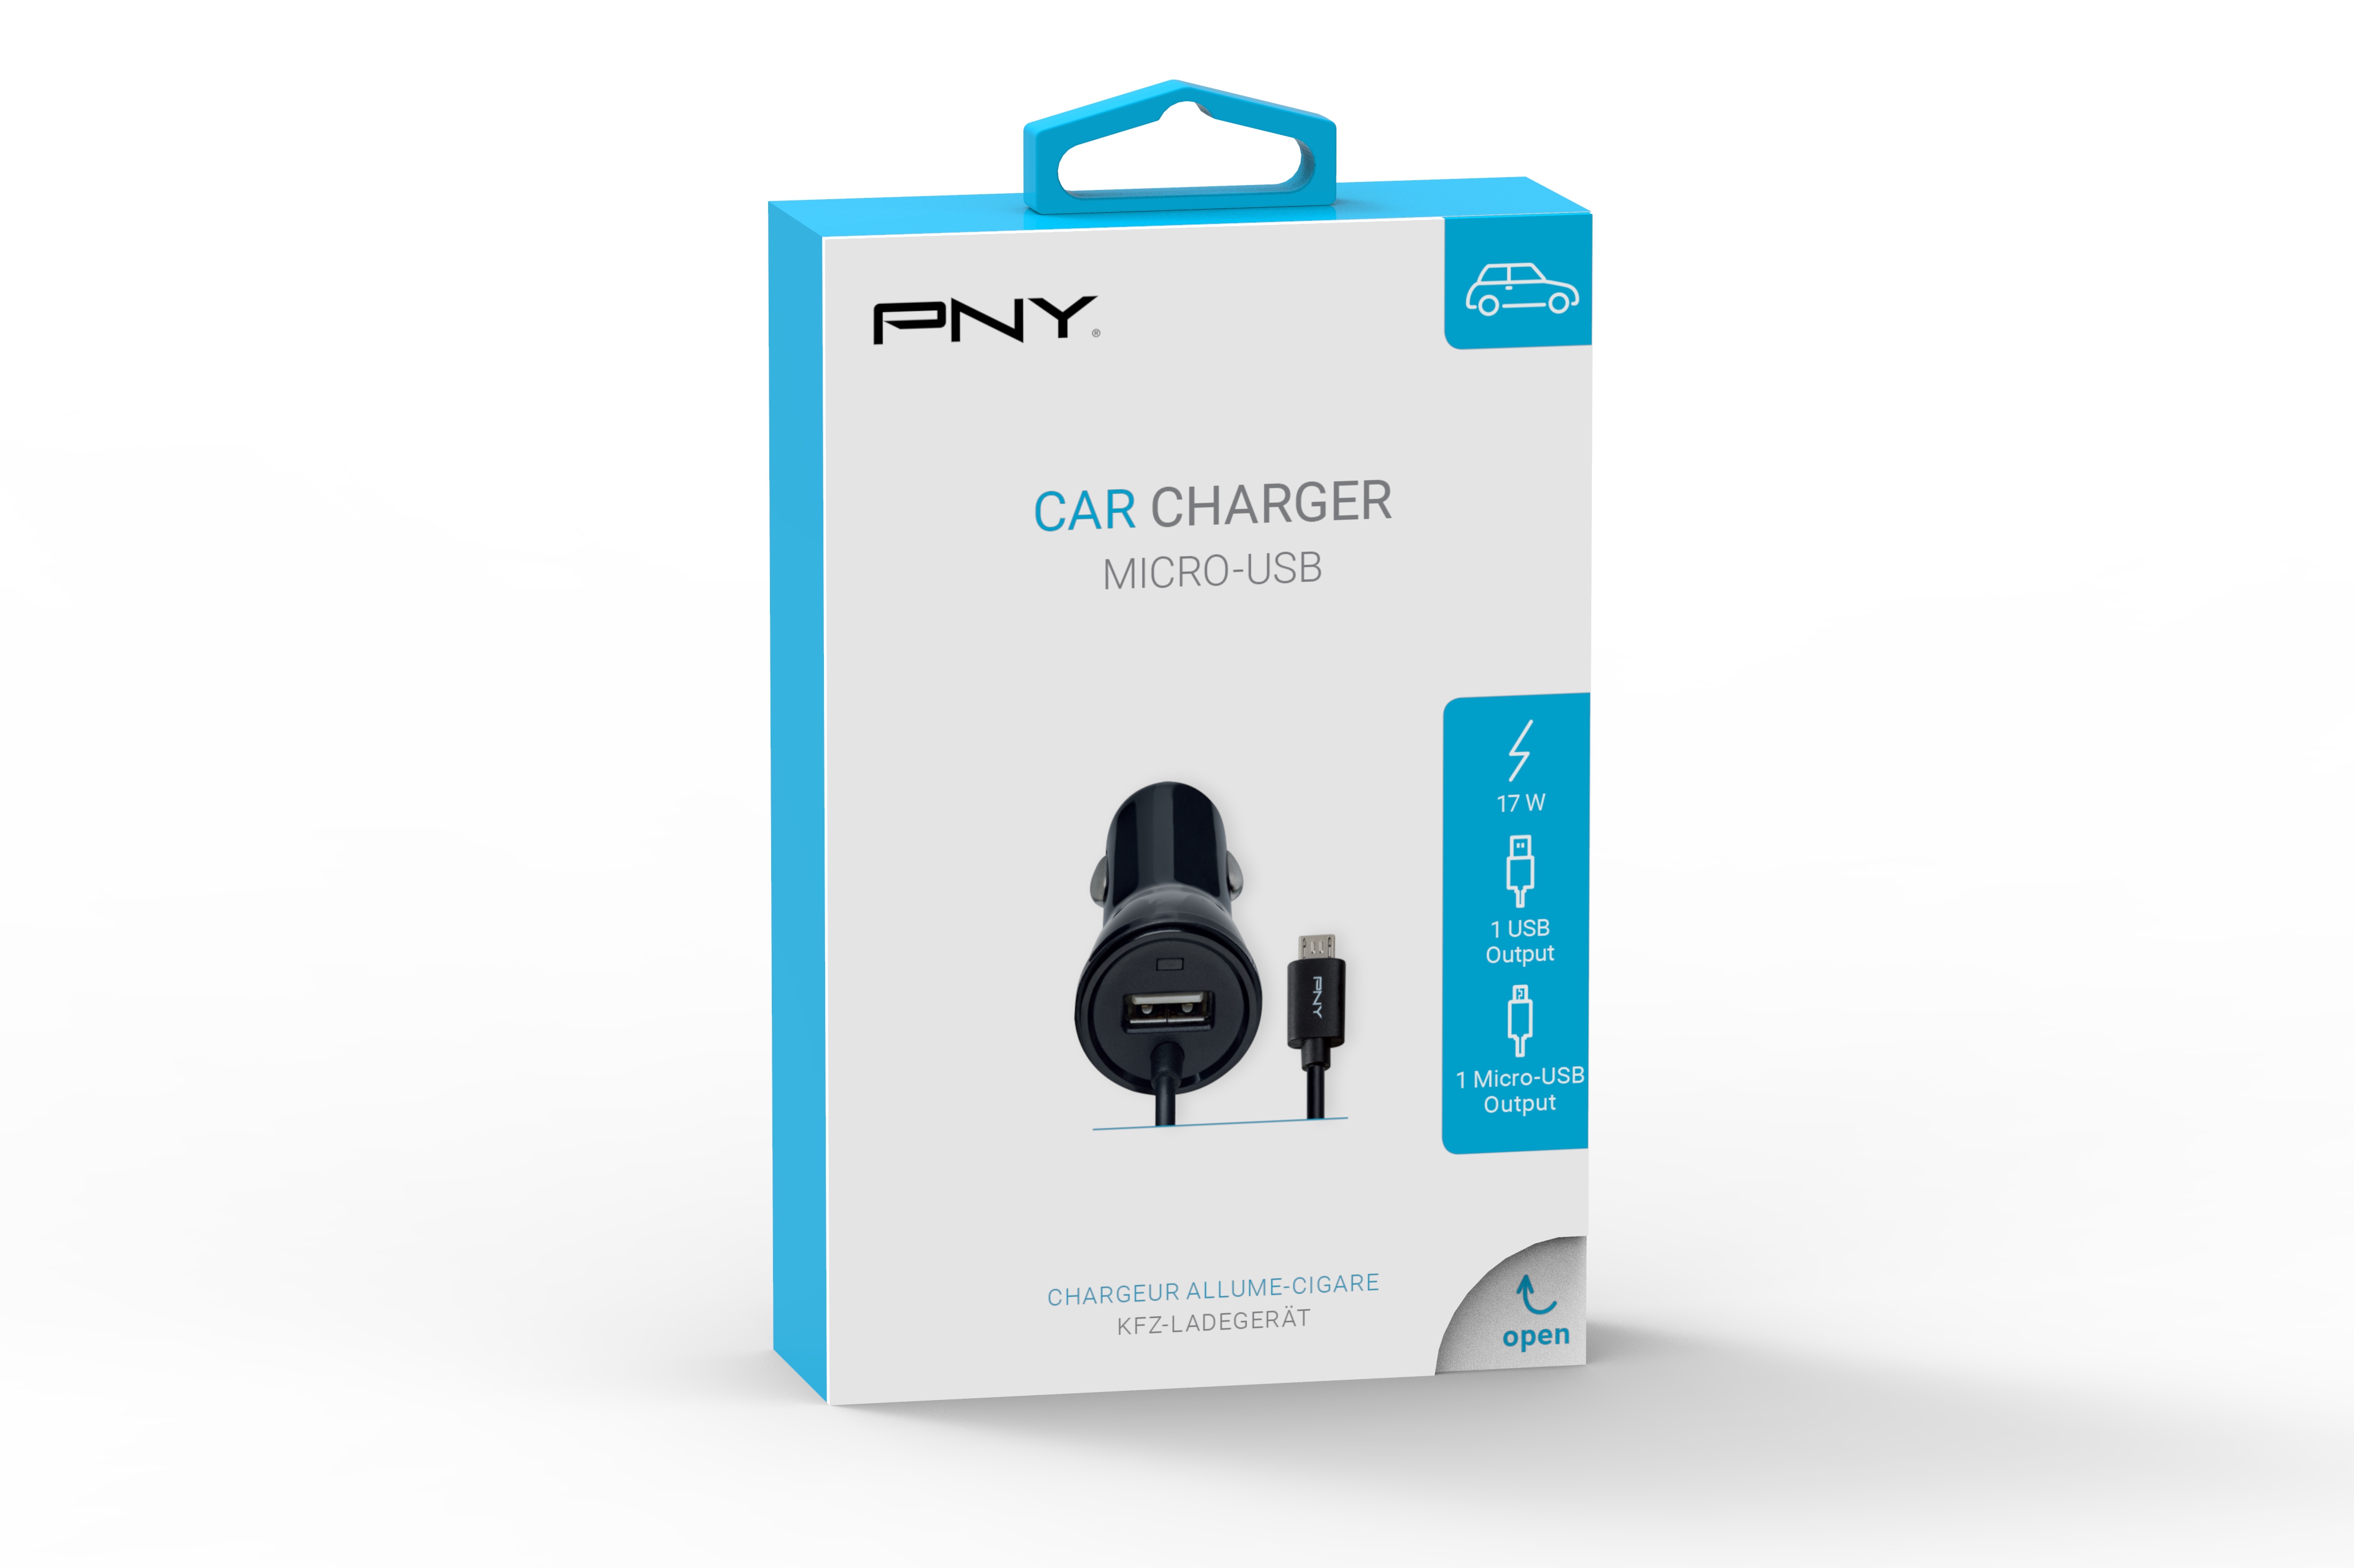 PNY_Micro-USB_CarCharger_NewPackaging.jpg